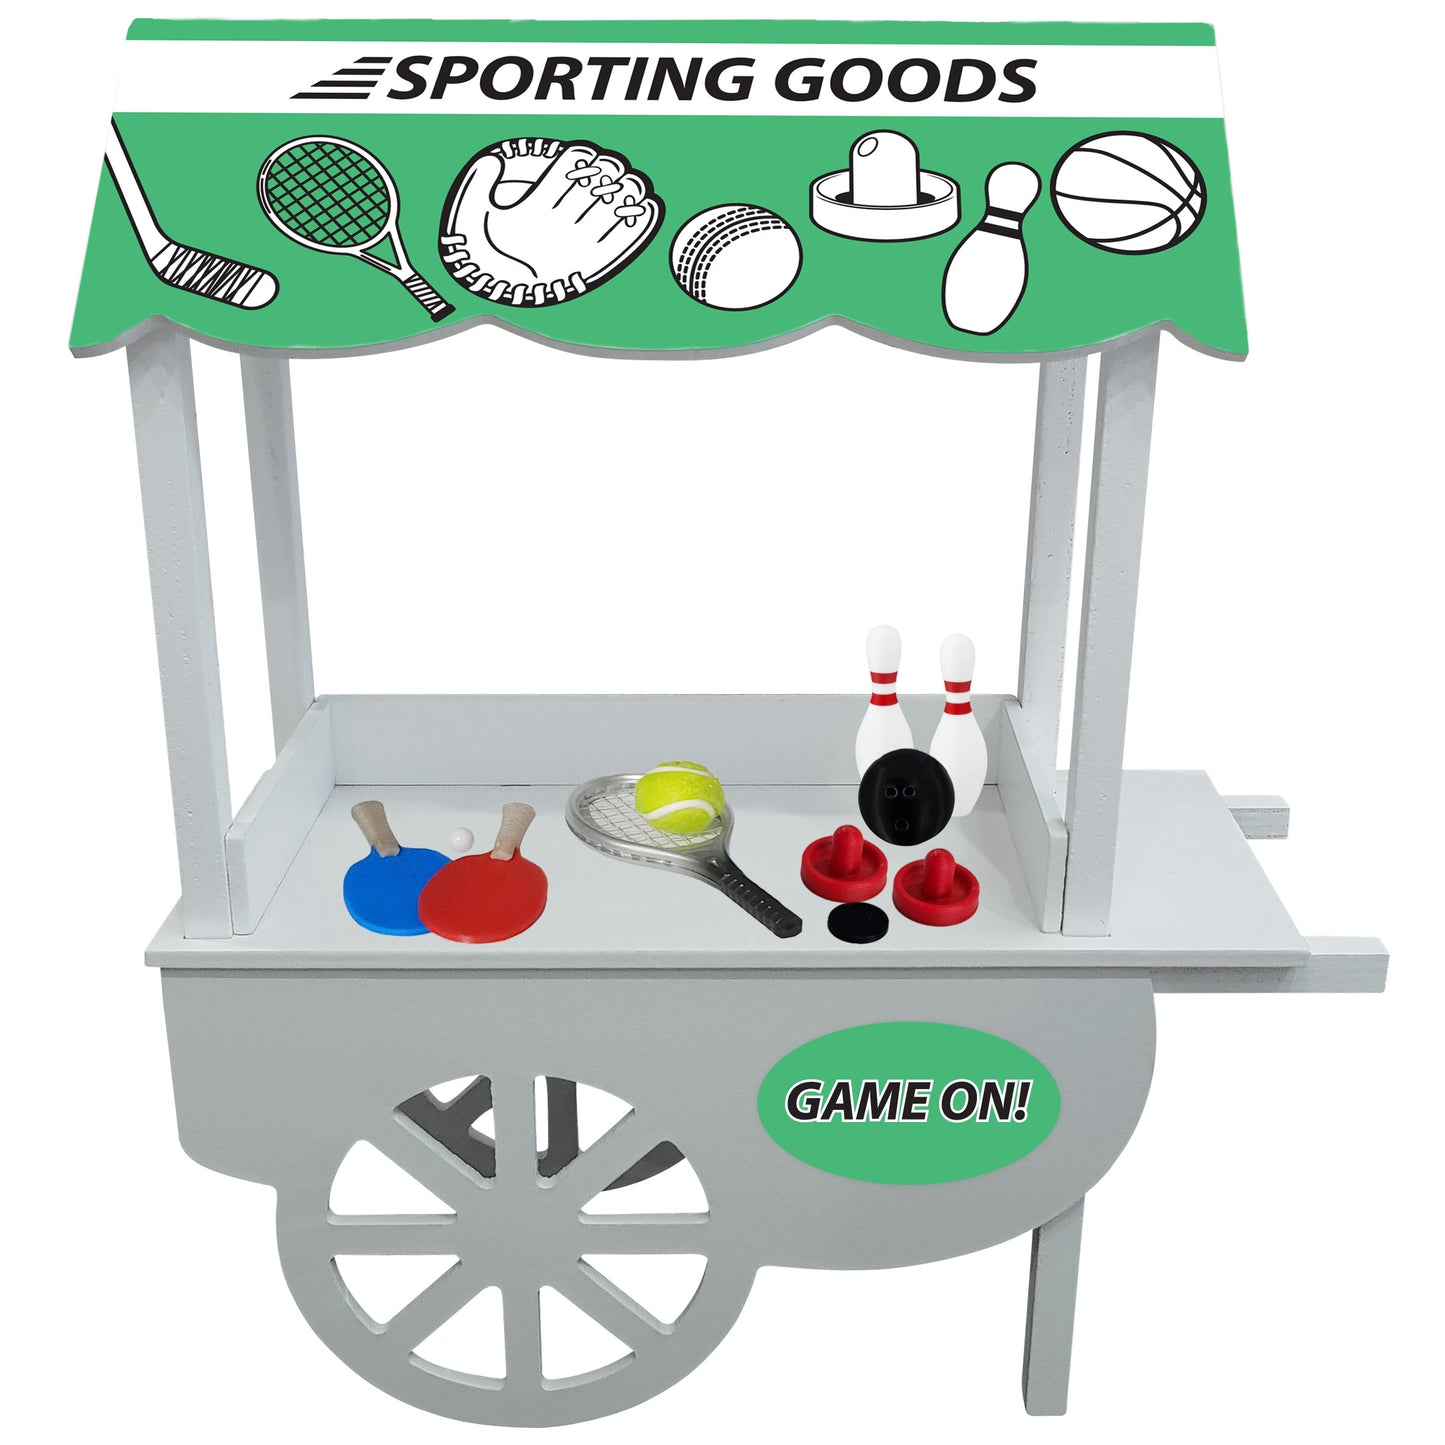 elf sized sport shop with sporting equipment